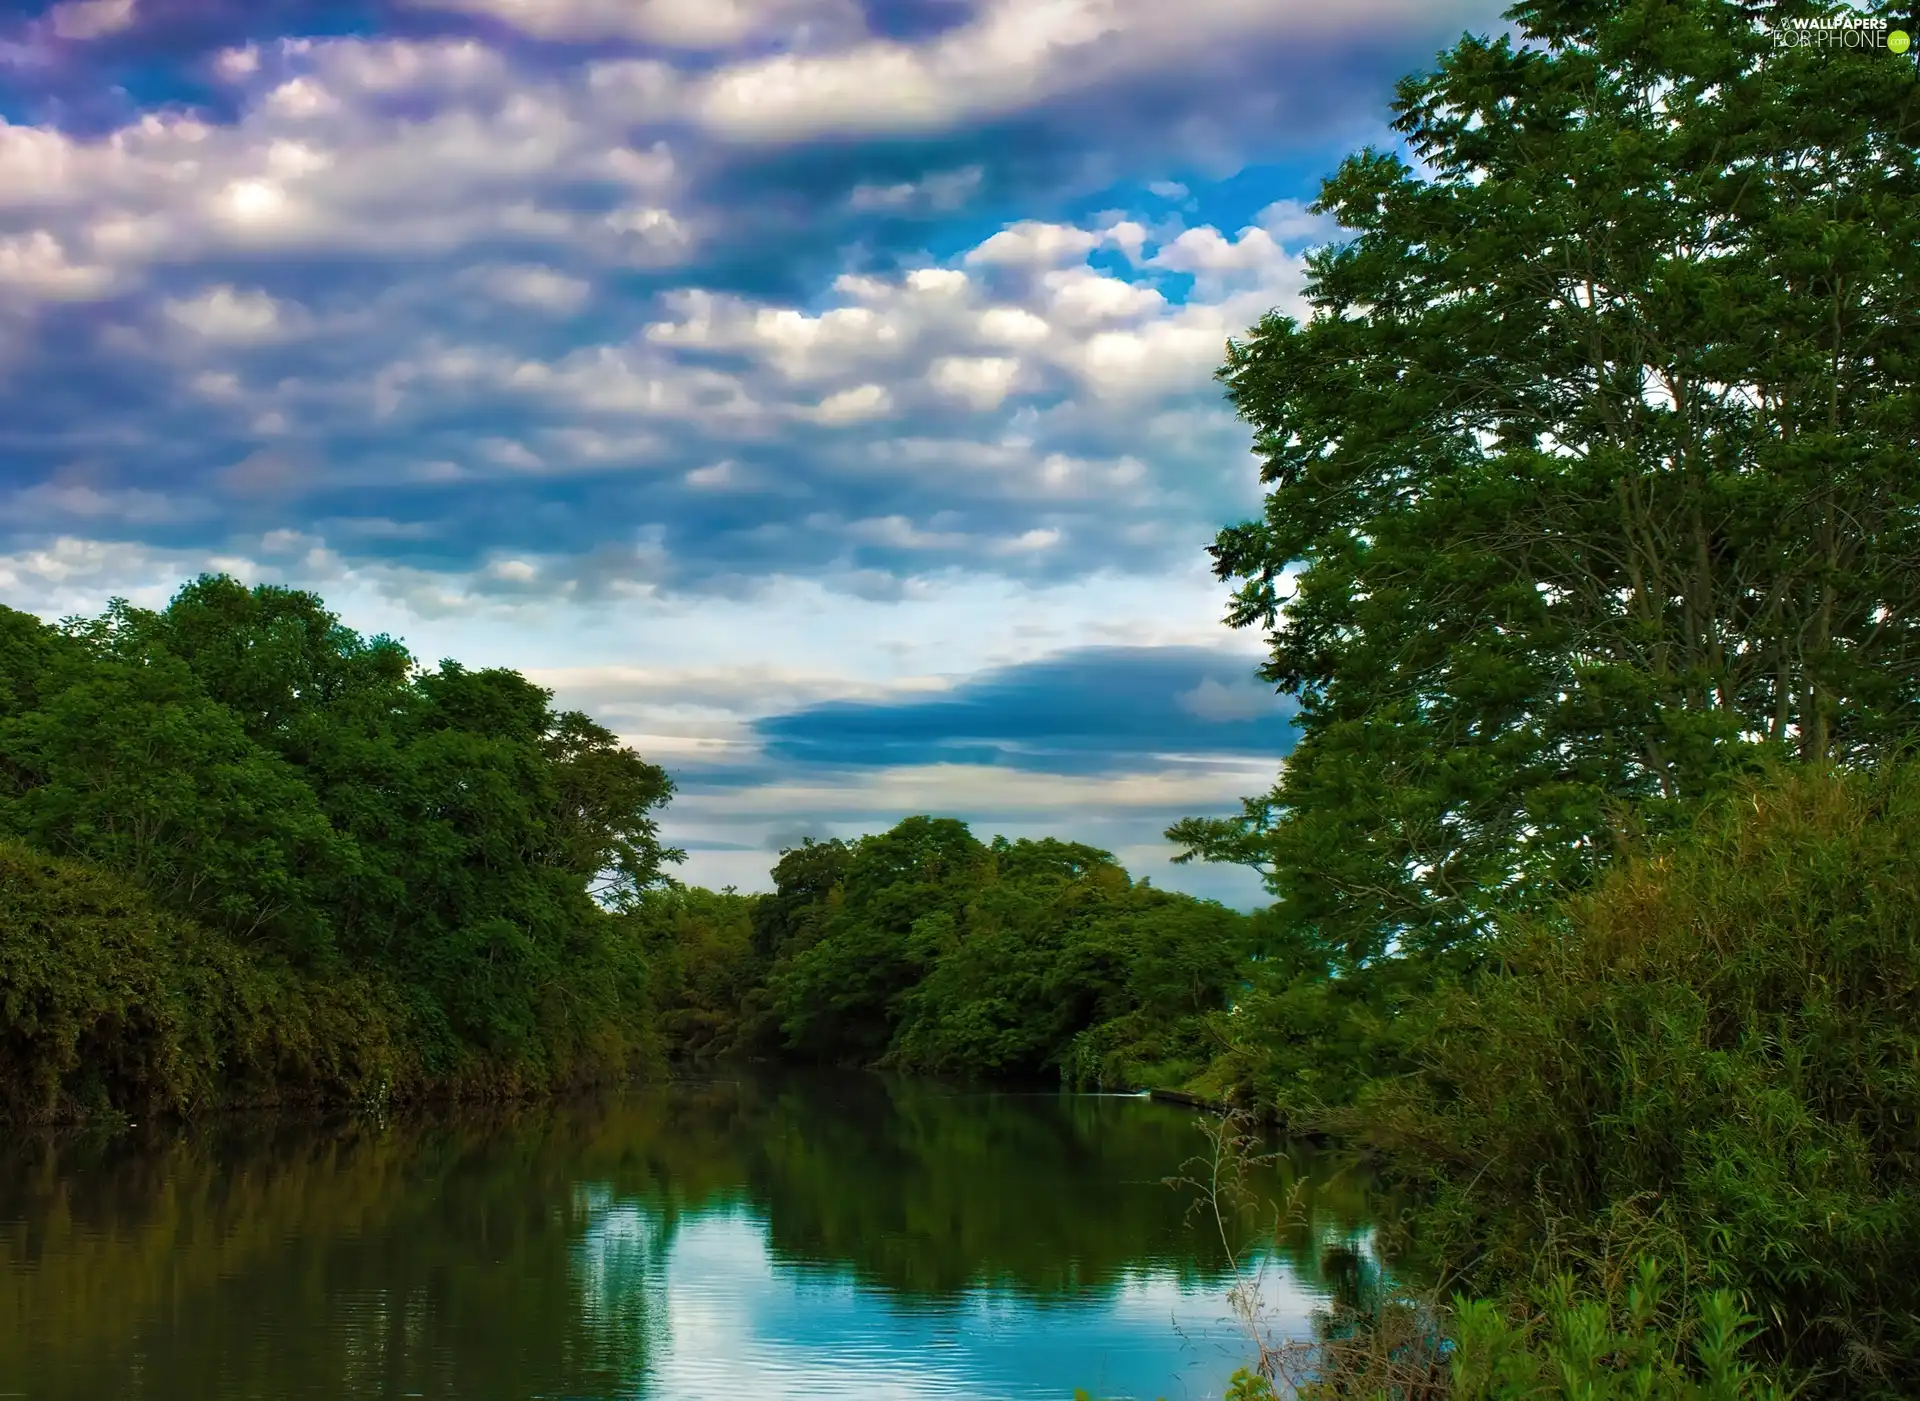 River, viewes, clouds, trees